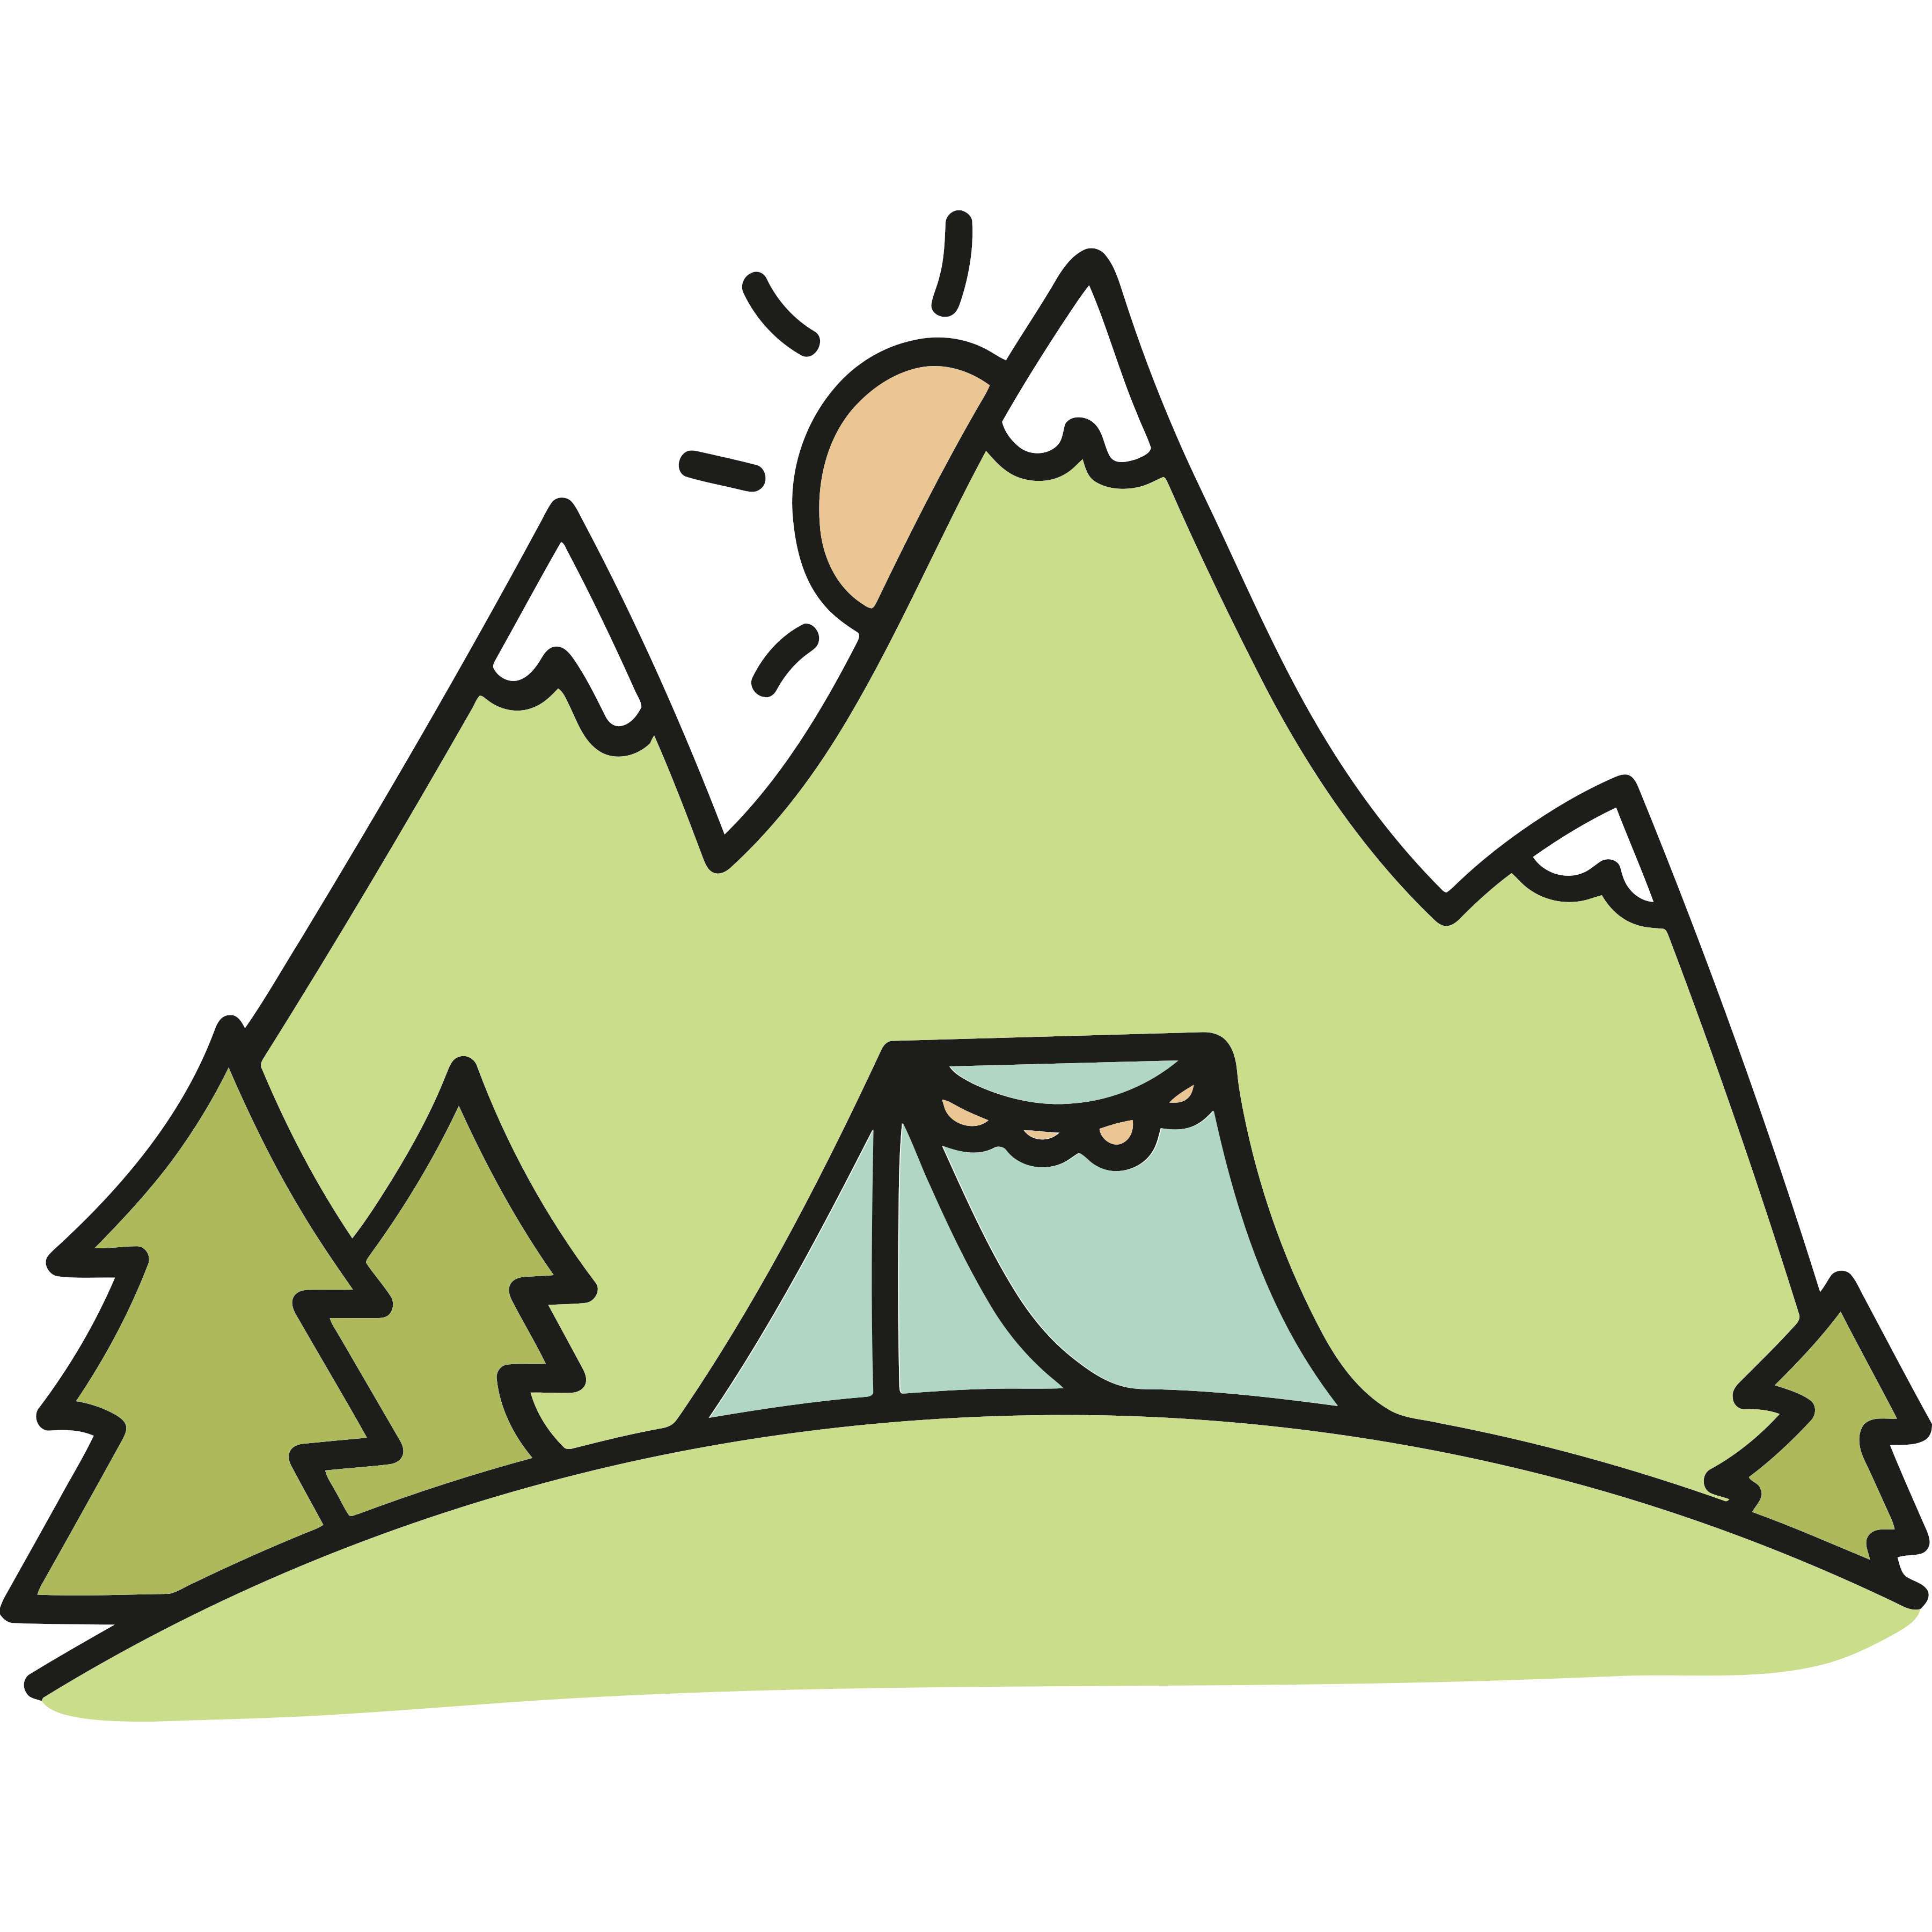 Camping Tent Outdoors Nature Mountains SVG and PNG